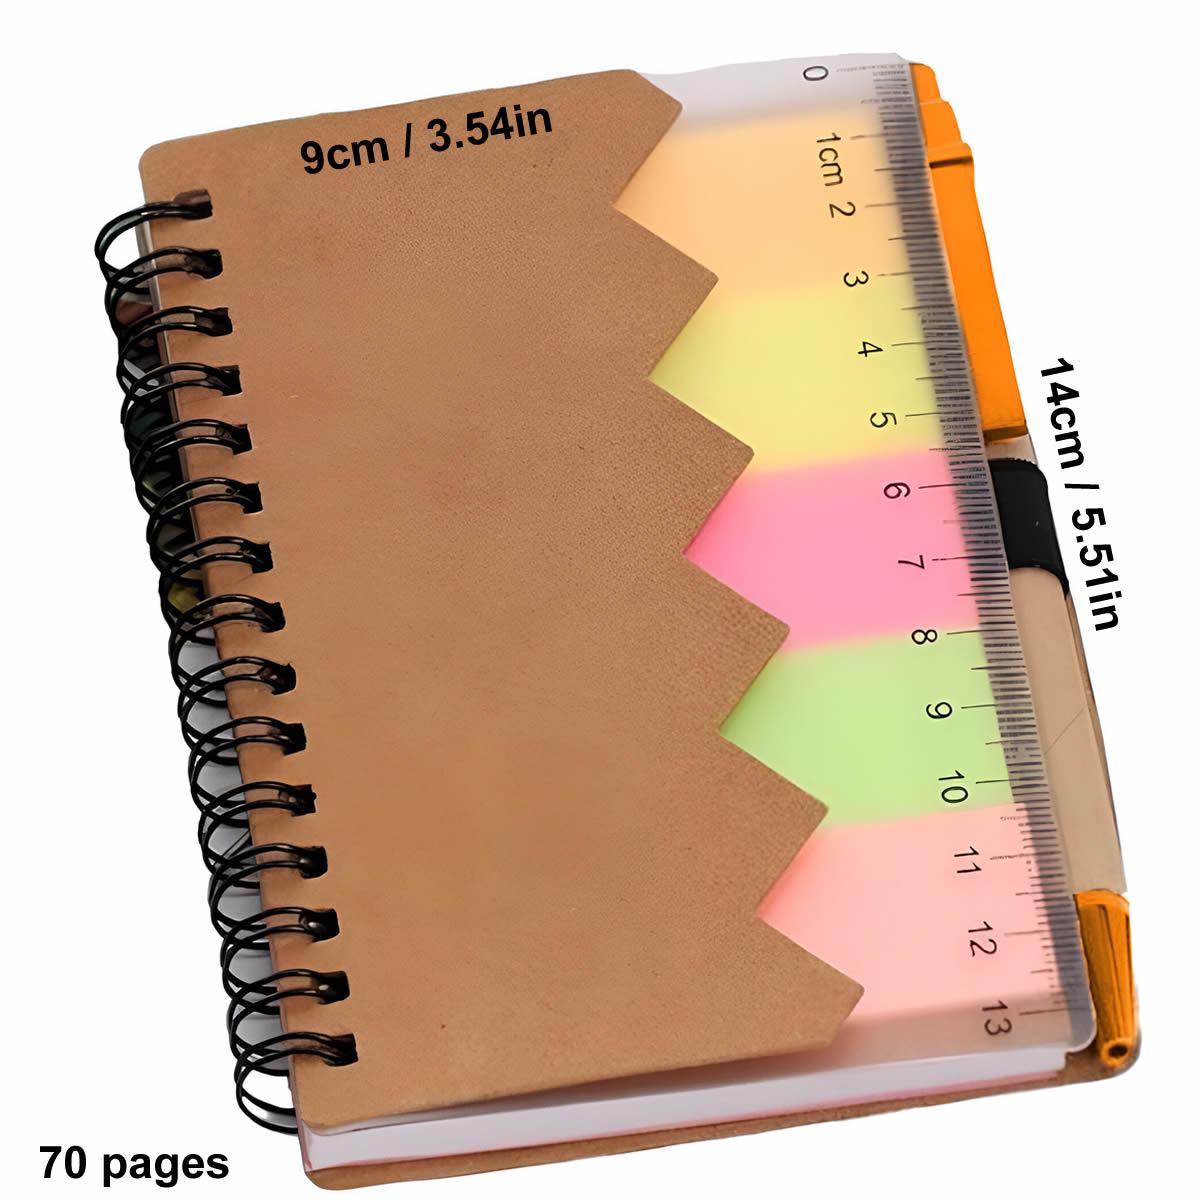 KX-409 - Eco-Friendly Pocket Complete Set Notebook with Ruler